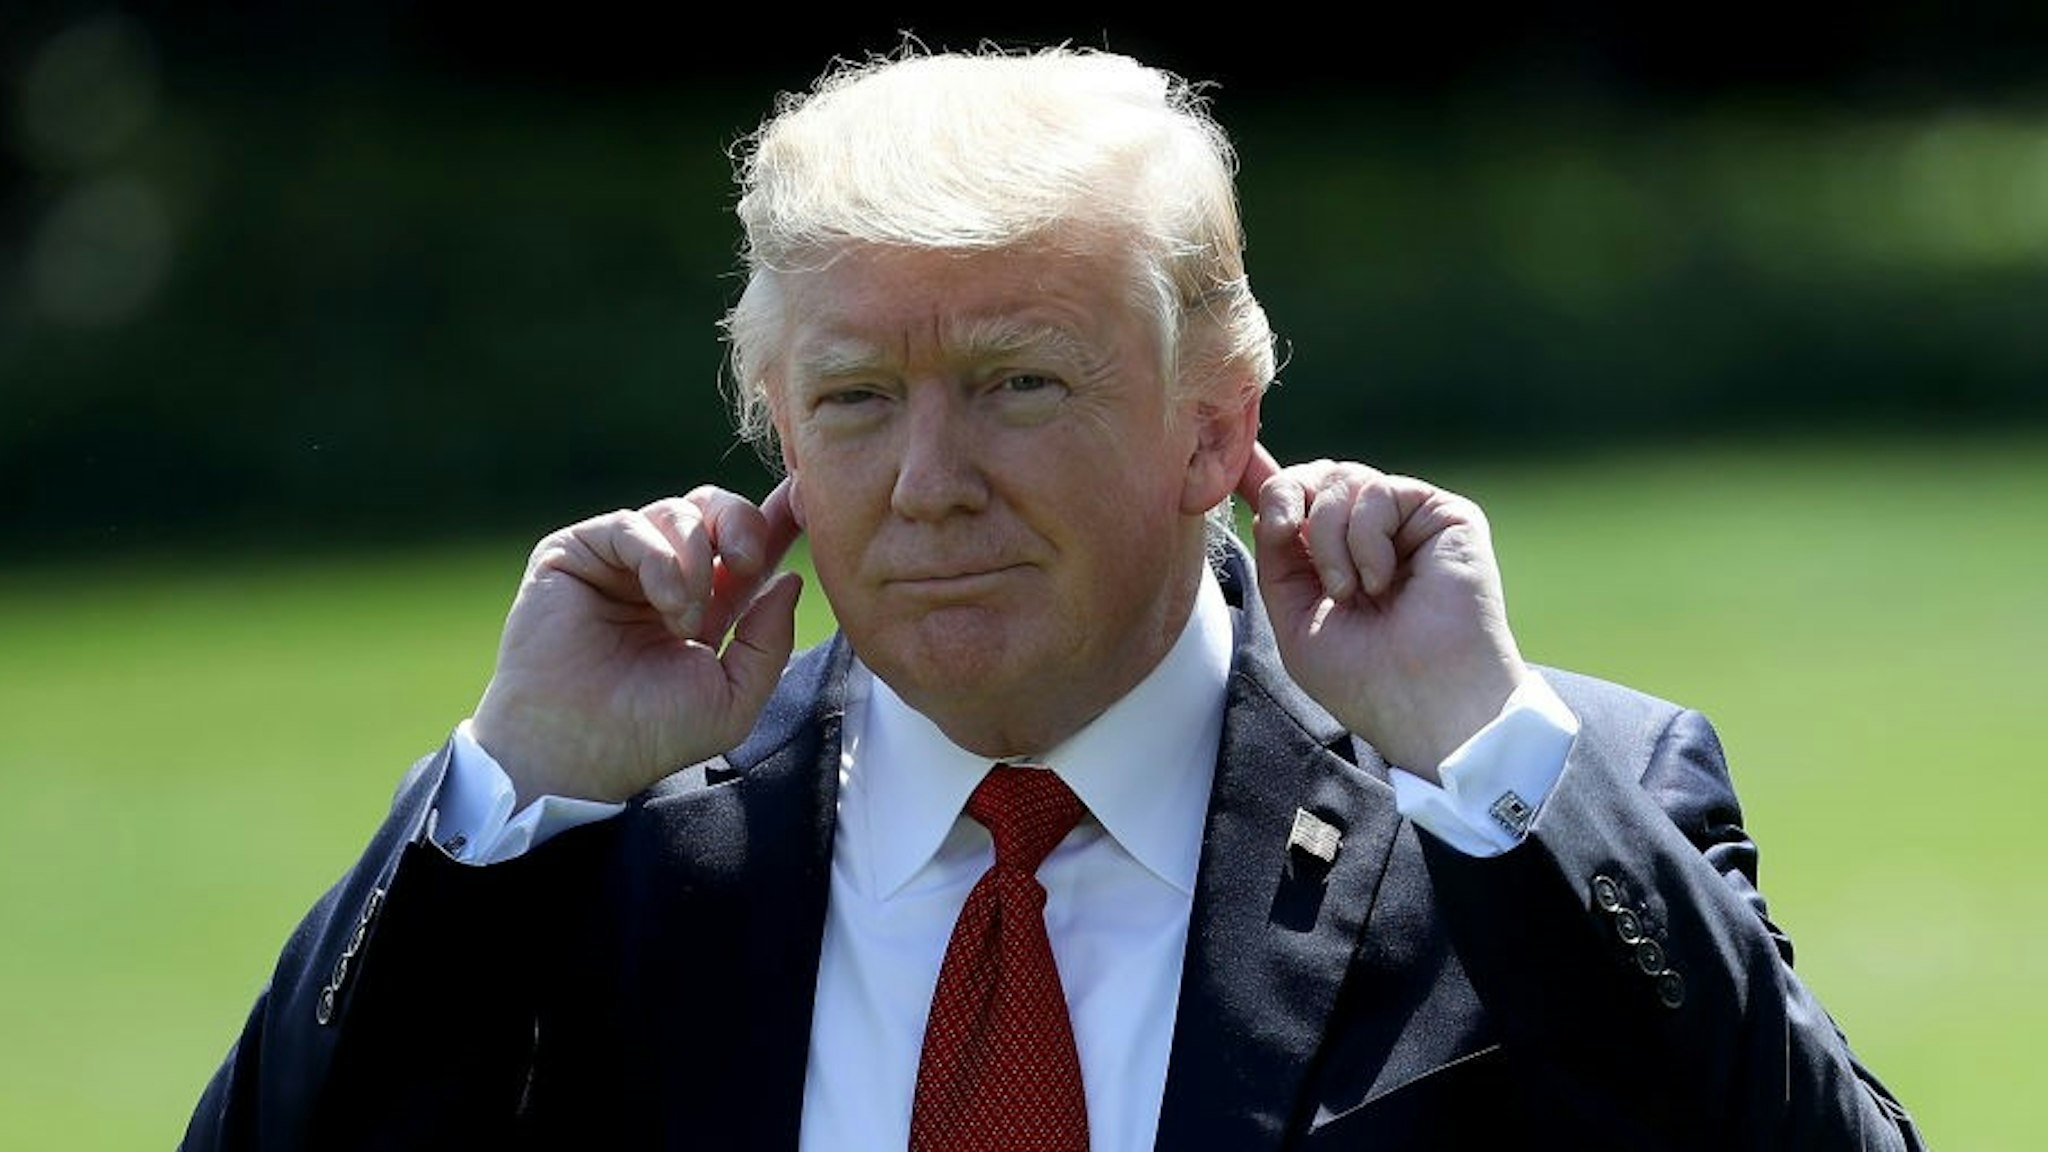 WASHINGTON, DC - SEPTEMBER 08: US President Donald Trump points to his ears as he tries to hear shouted questions from reporters while departing the White House for Camp David September 8, 2017 in Washington, DC. Trump is scheduled to meet with members of his Cabinet this weekend while at Camp David. (Photo by